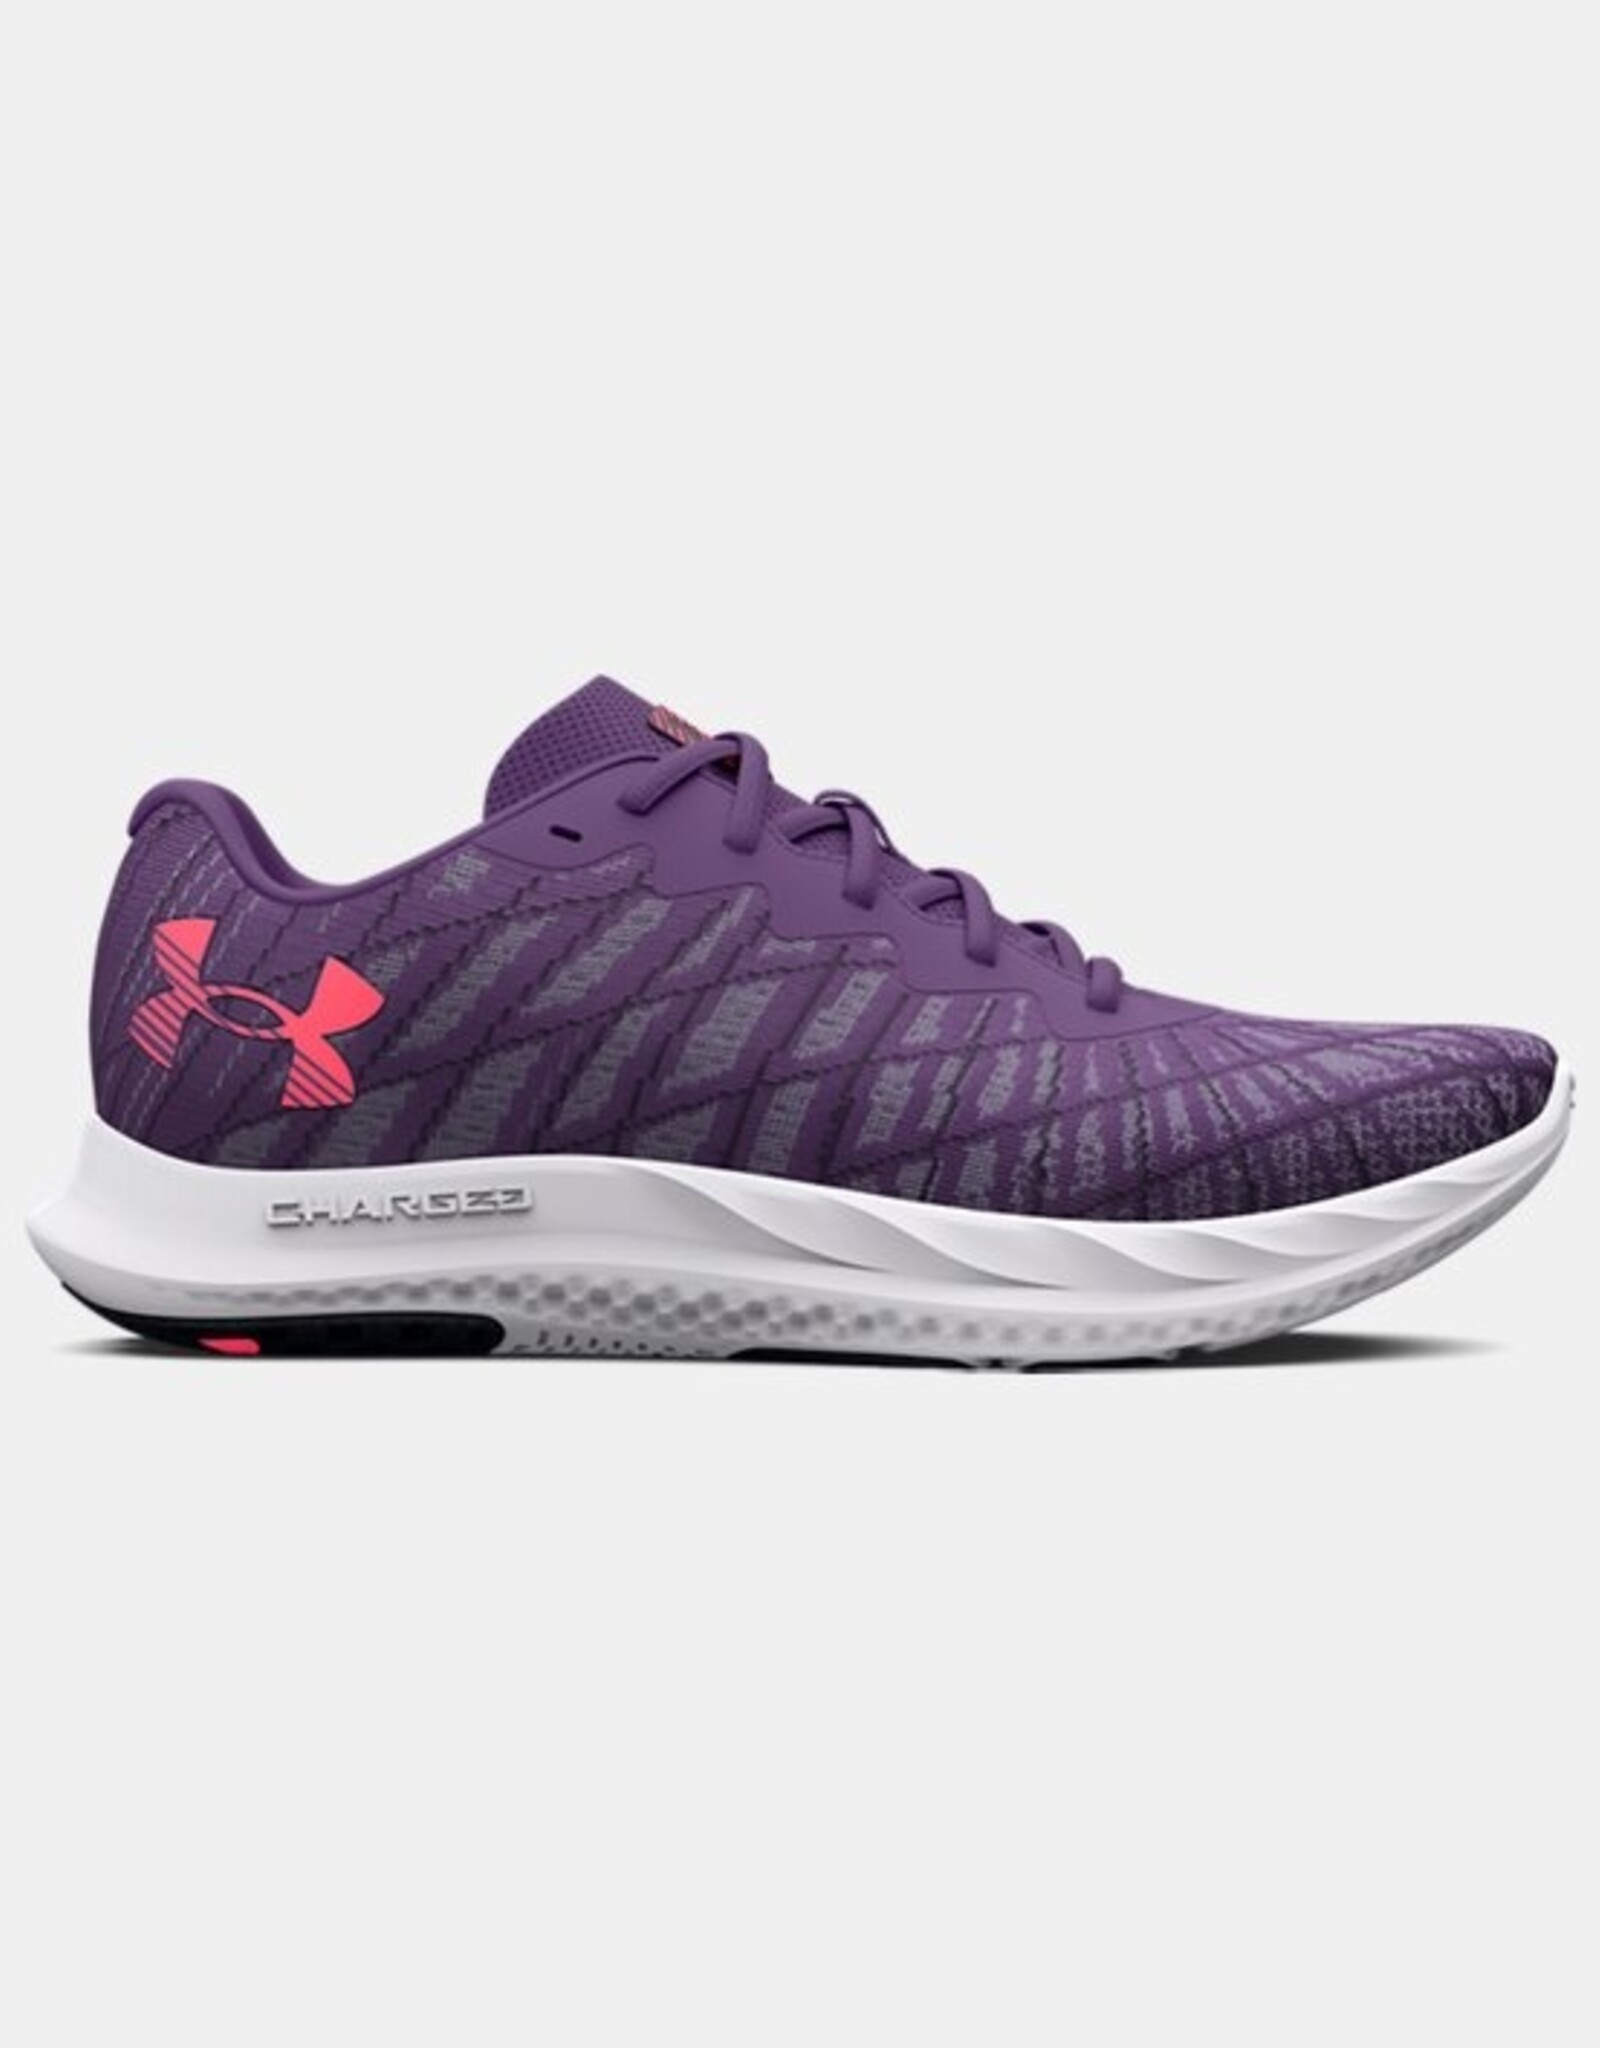 Under Armour W UA CHARGED BREEZE 2